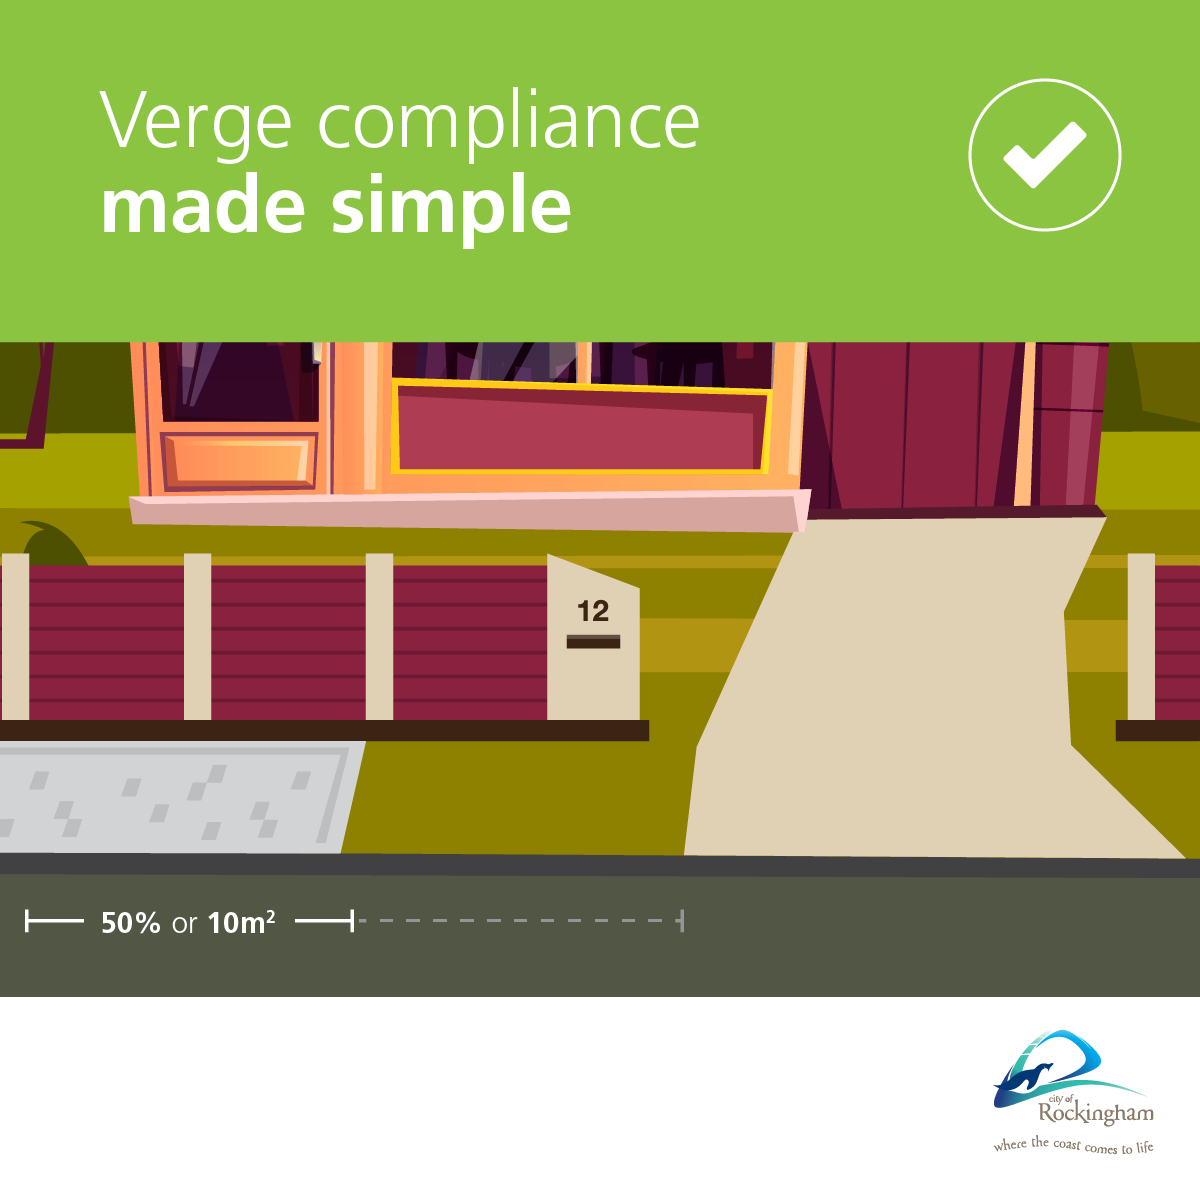 Verge compliance made simple image